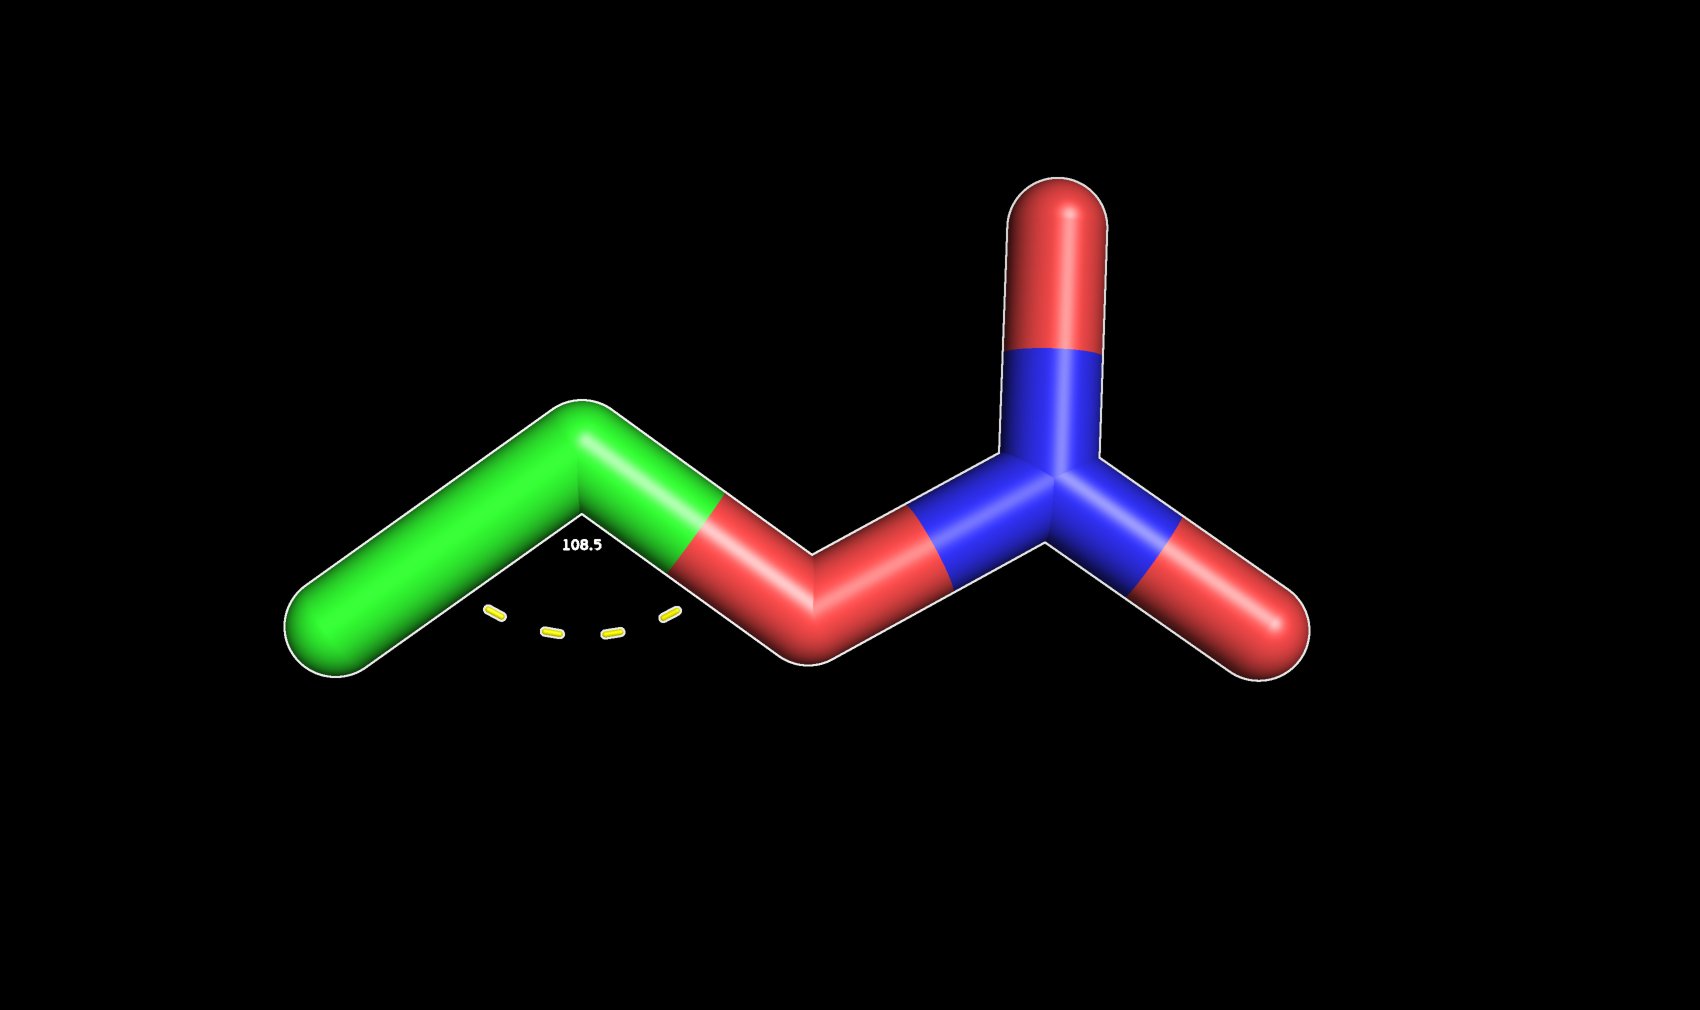 The angle value between three atoms in a propane molecule displayed in PyMOL.